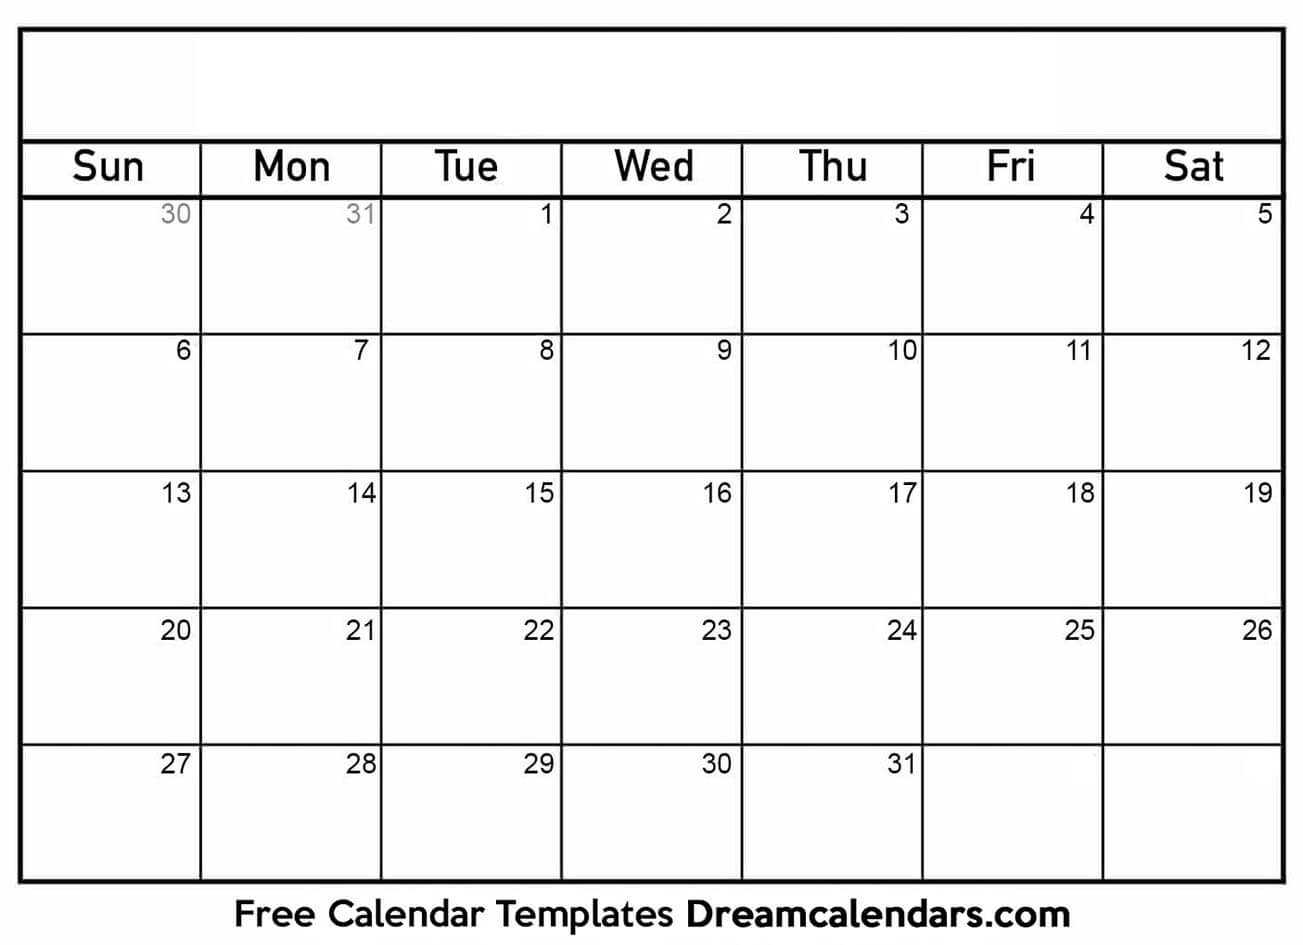 How To Create A Blank Calendar In Excel